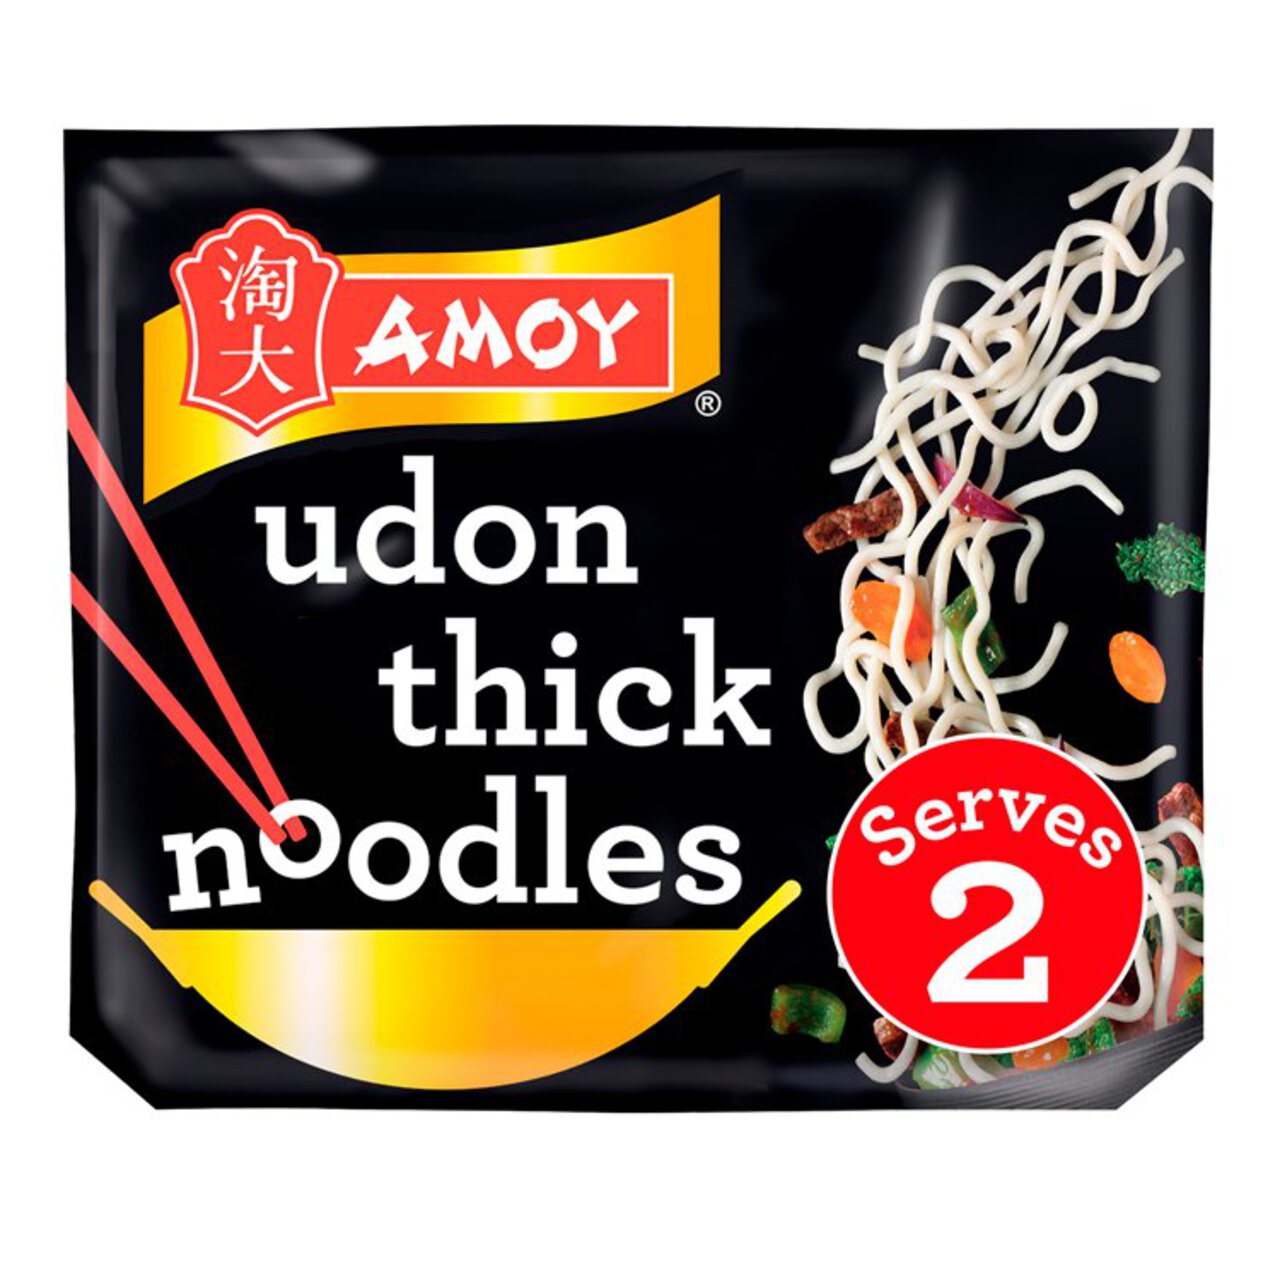 Amoy Straight To Wok Udon Thick Noodles 2 x 150g